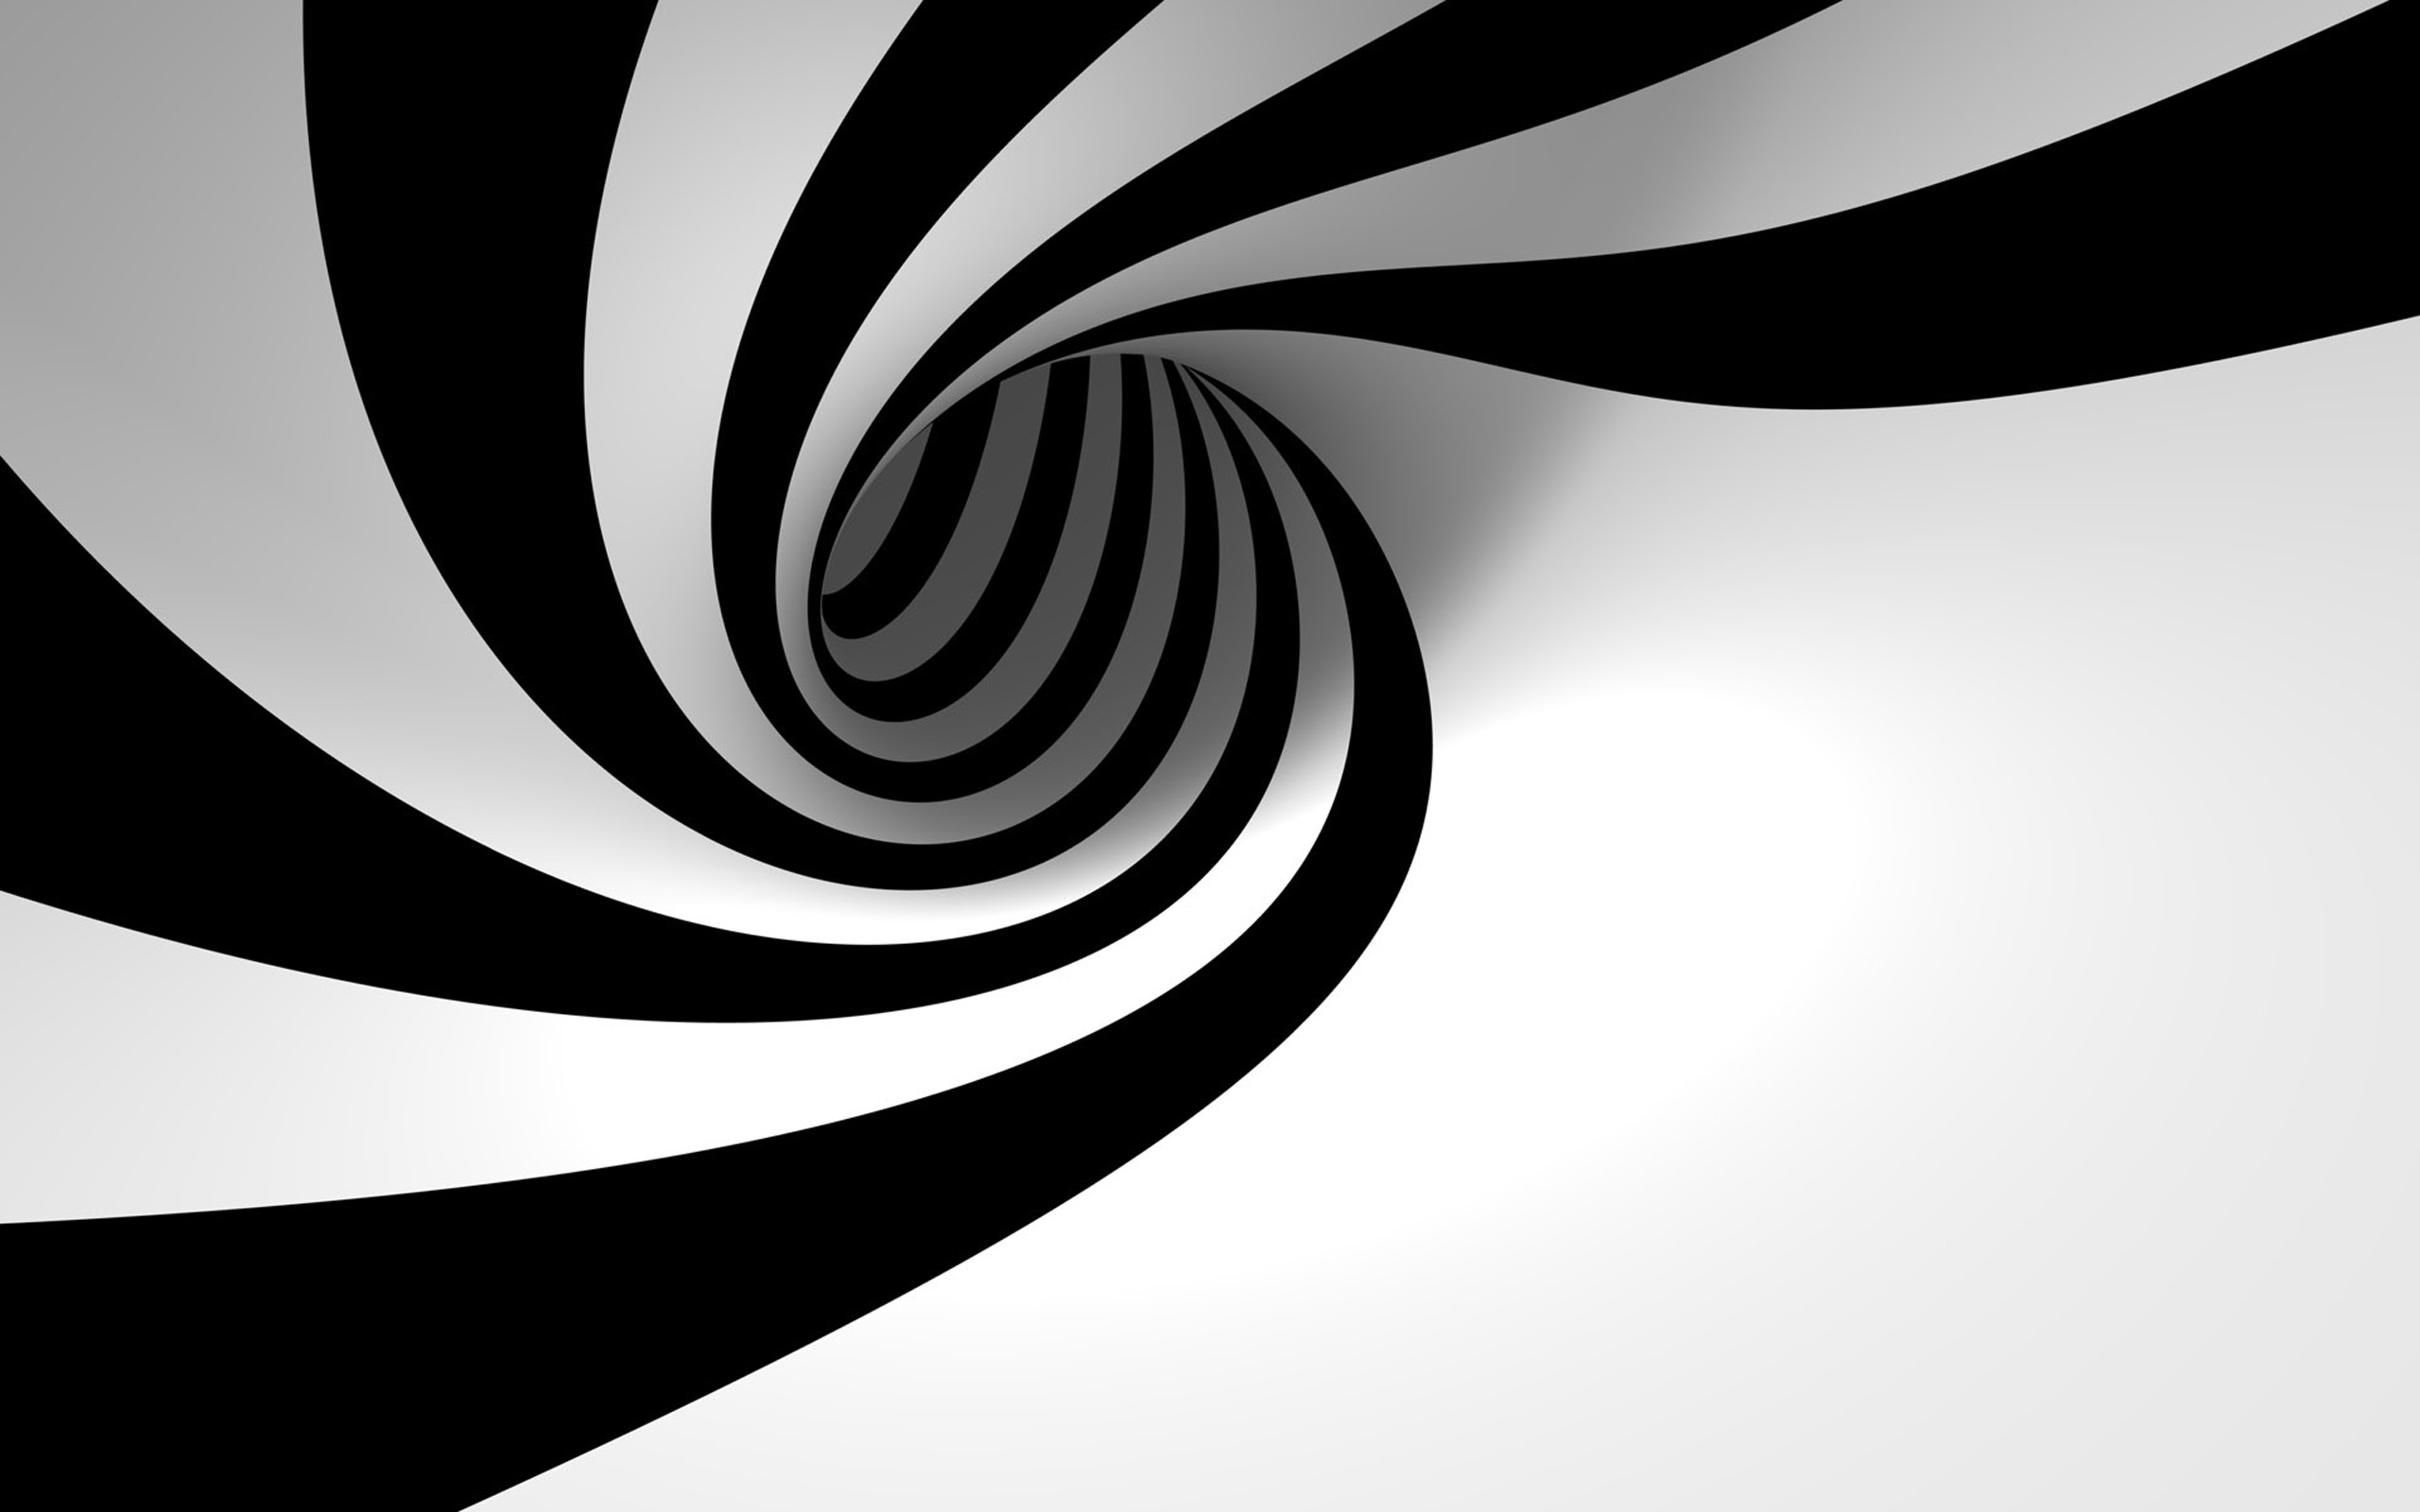 3d, View, Abstract, Black, And, White, Minimalistic, Hole, Spiral, Zebra